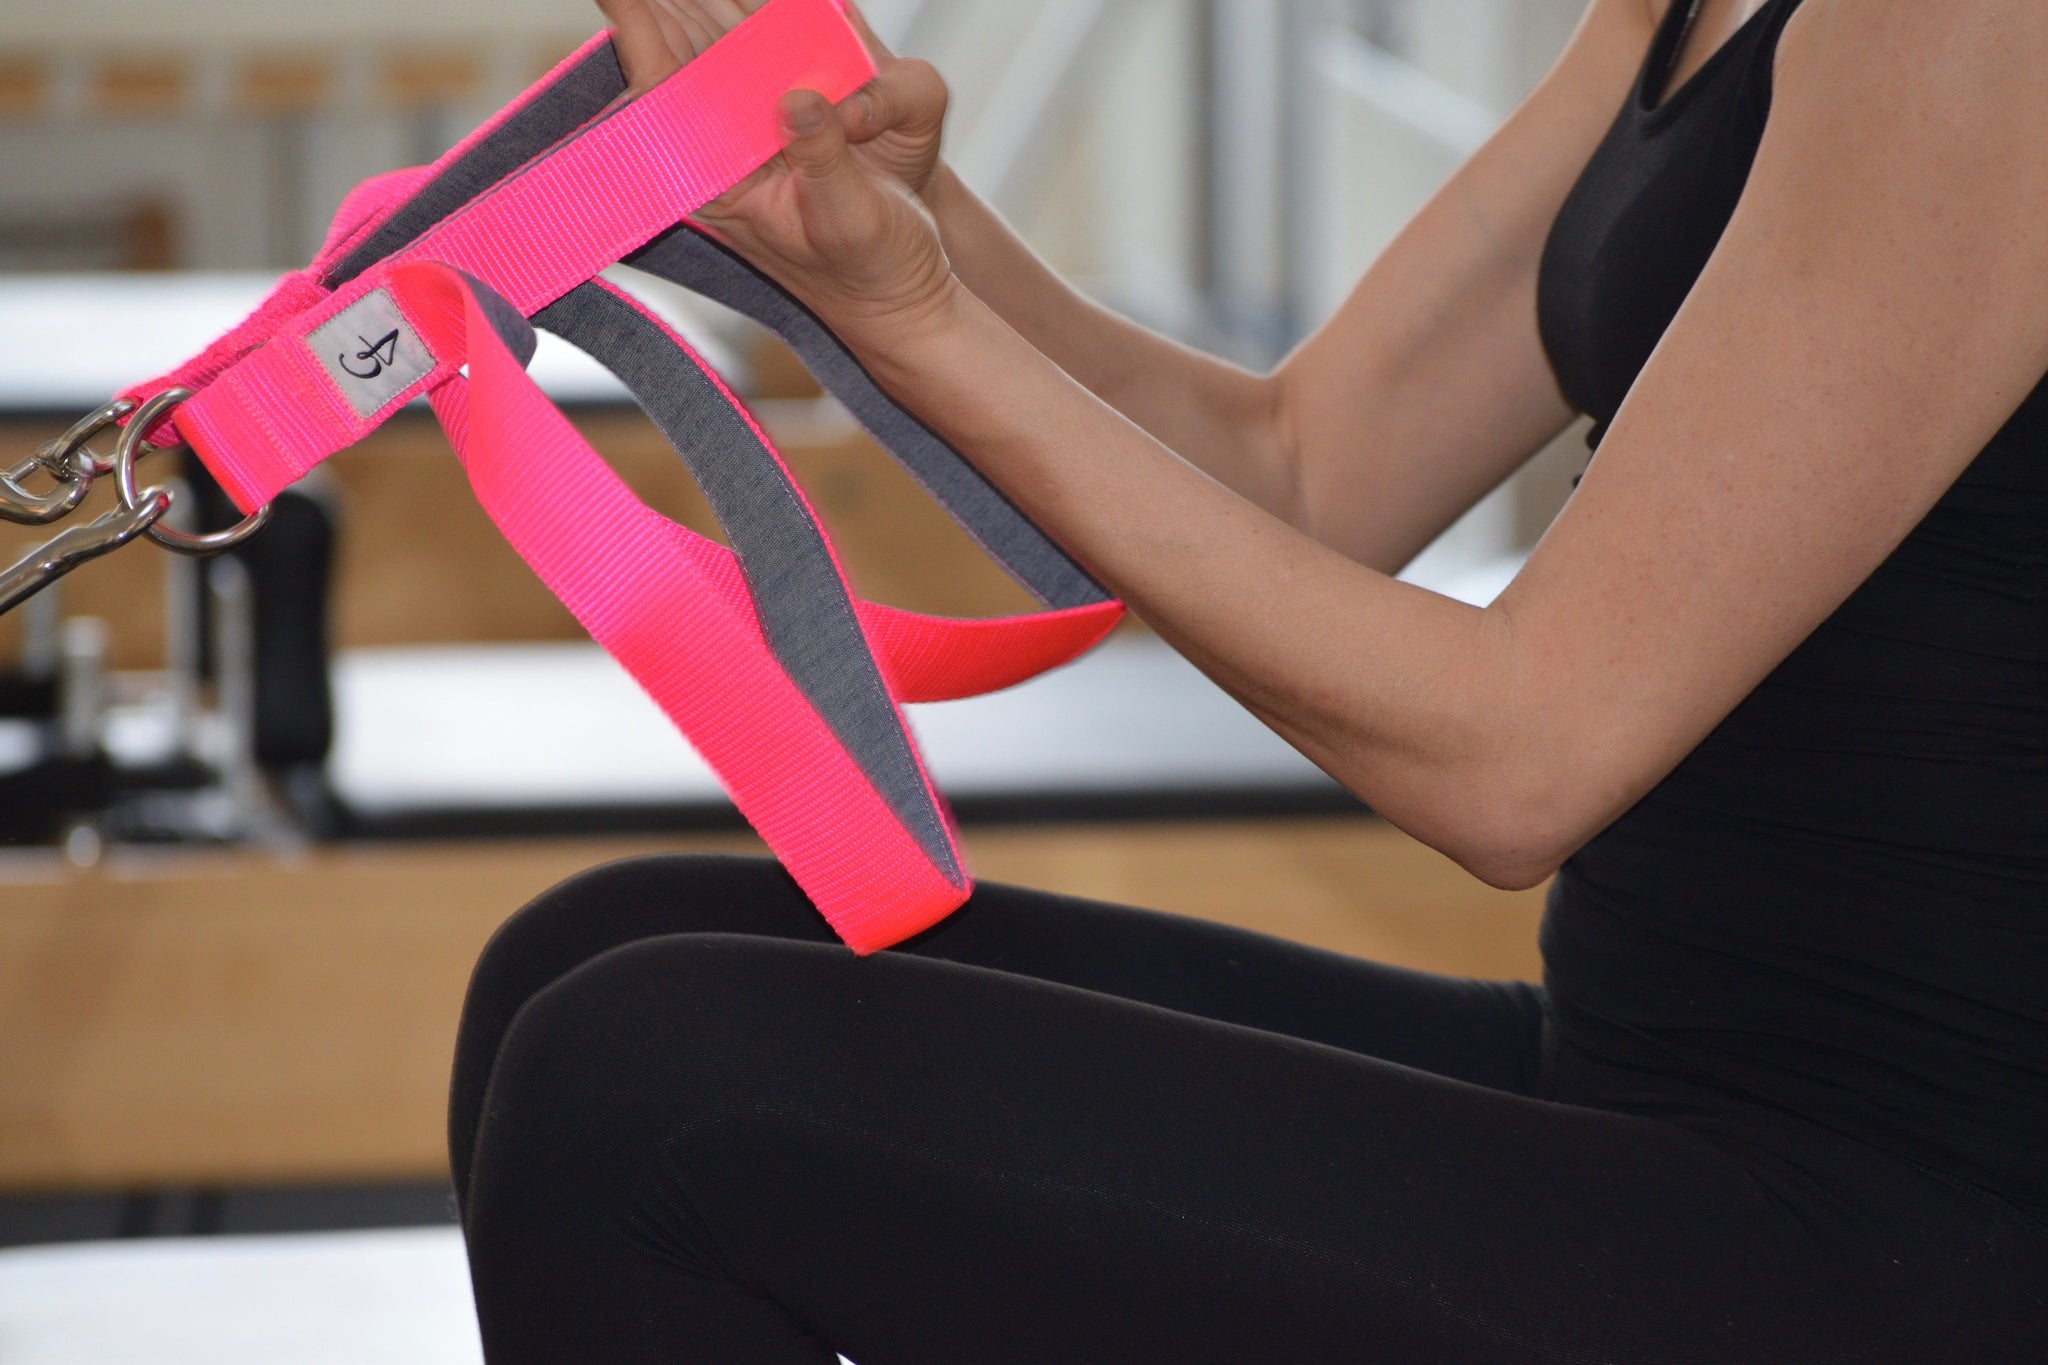 Why Good Citizen Personal Pilates Loops Are A Pilates Essential.